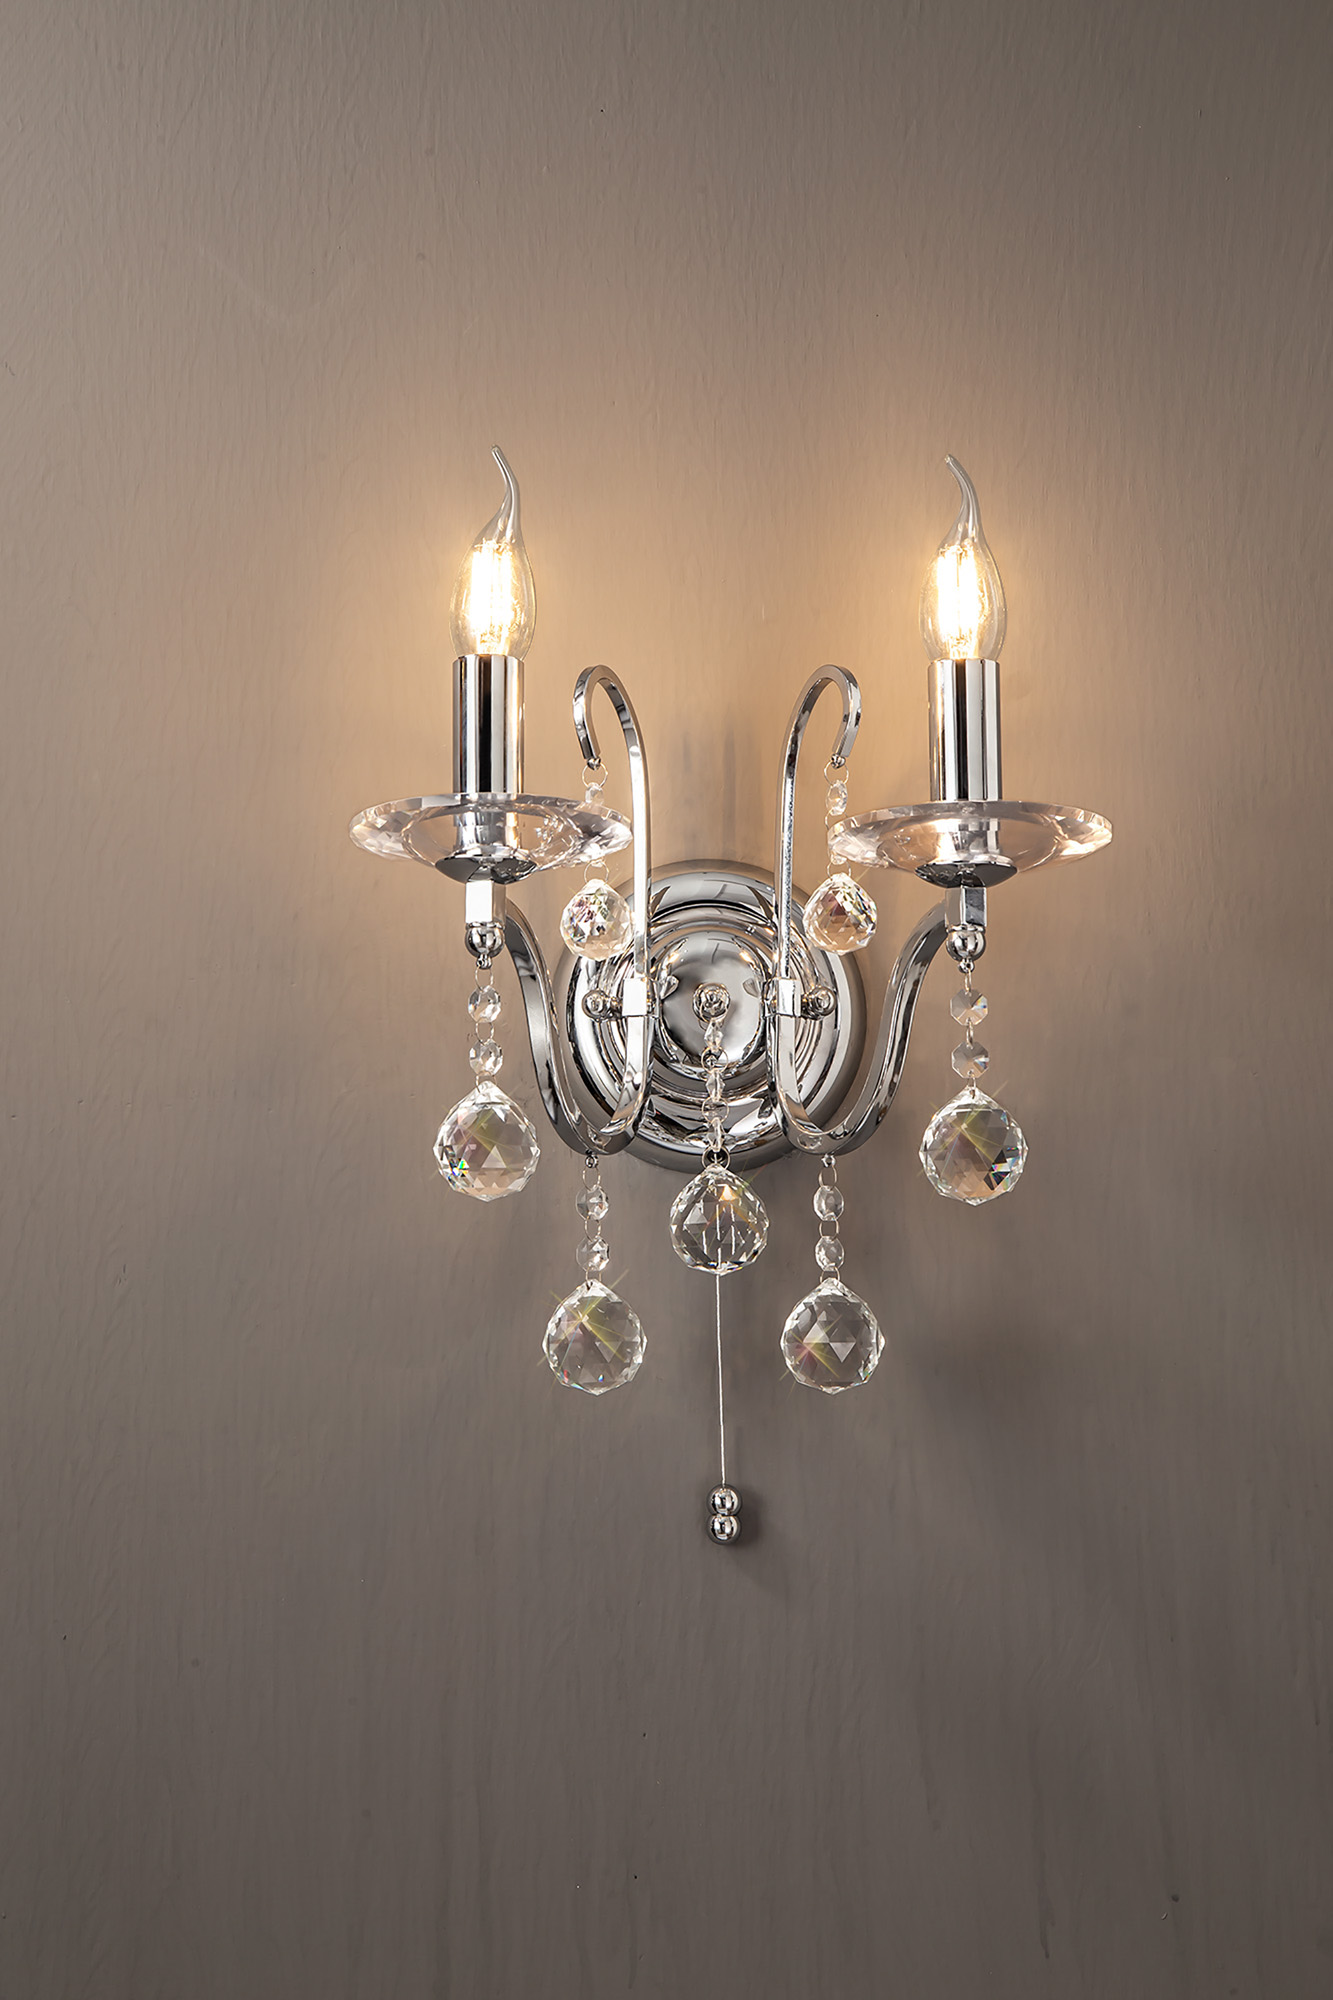 IL30112  Bianco Crystal Switched Wall Lamp 2 Light Polished Chrome